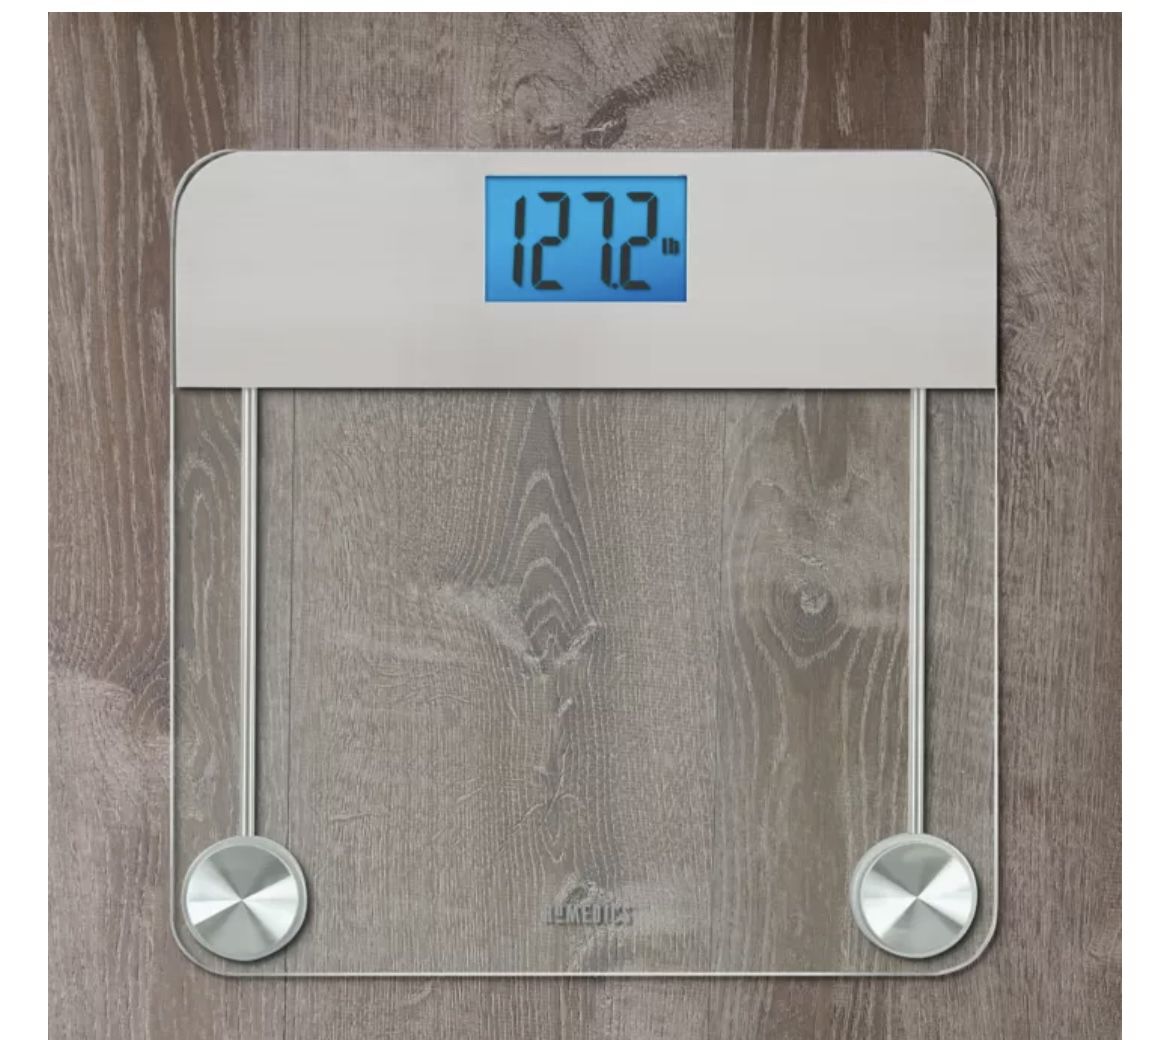 Homedics Large Dial Bathroom Scale Sc-110 300 Pound Capacity. for Sale in  Philadelphia, PA - OfferUp